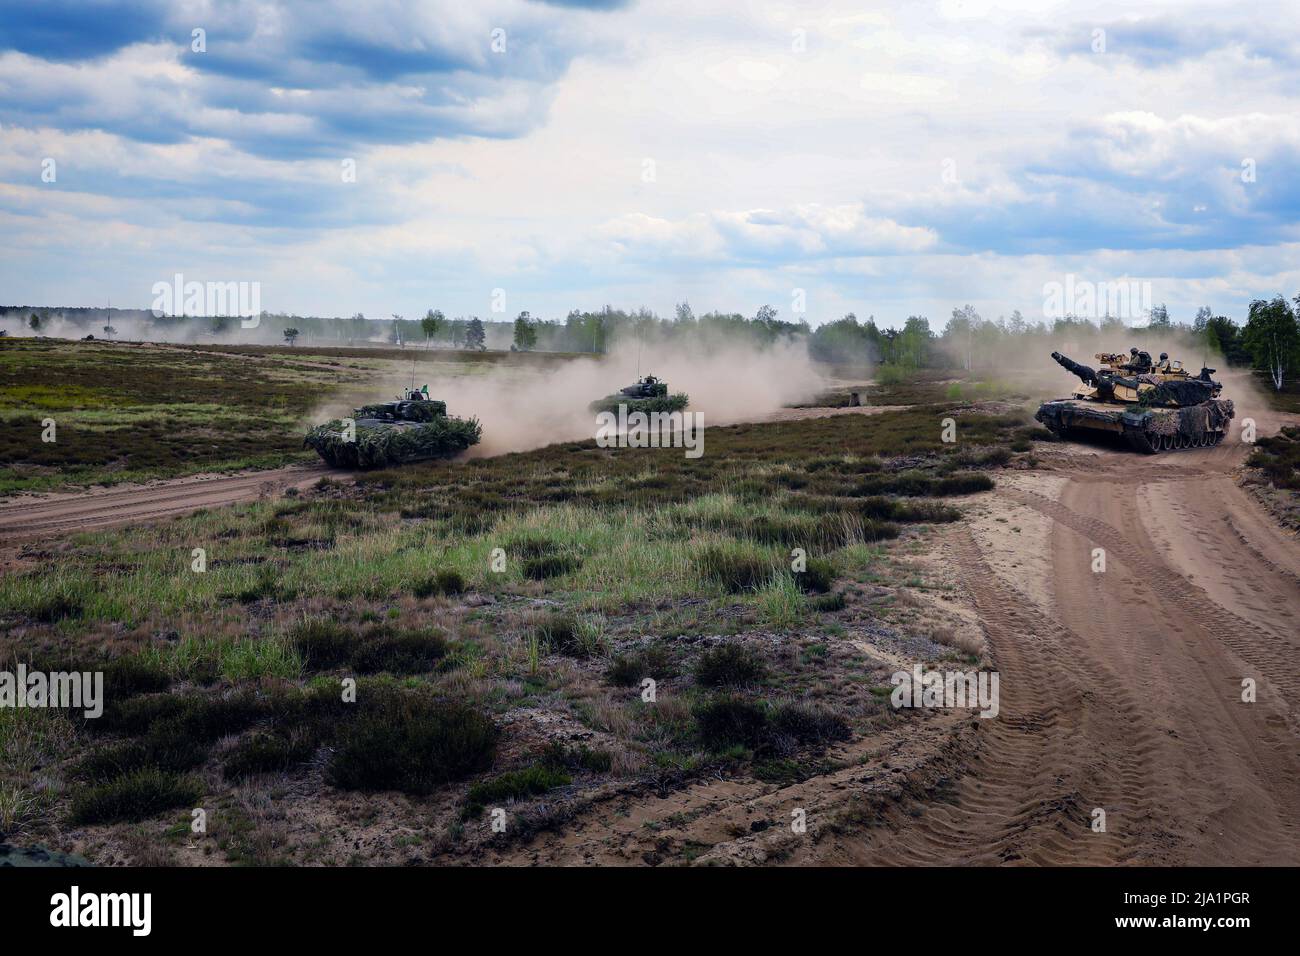 Germany. 13th May, 2022. U.S. Soldiers of the 1st Battalion, 8th Infantry Regiment, 3rd Armored Brigade Combat Team, 4th Infantry Division, and the German army conduct a rehearsal at a range before a live-fire exercise at Oberlausitz Training Area, Germany, May 13, 2022. Defender Europe 22 is a series of U.S. Army Europe and Africa multinational training exercises taking place in Eastern Europe. The exercise demonstrates U.S. Army Europe and Africa's ability to conduct large-scale ground combat operations across multiple theaters in support of NATO. (Credit Image: © U.S. Army/ZUMA Press Wire Stock Photo